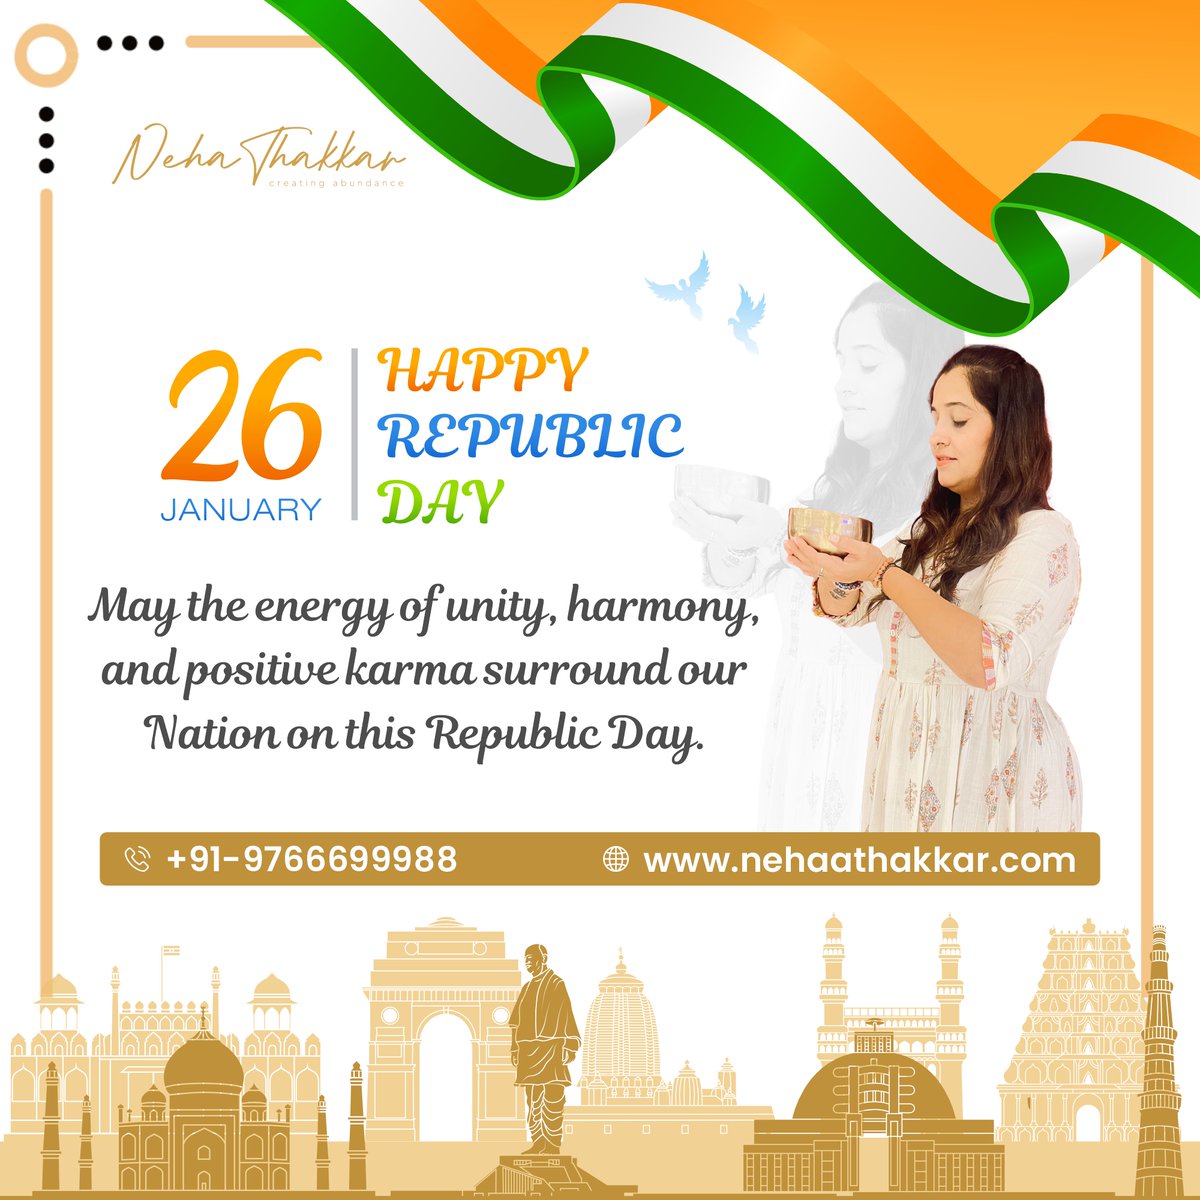 Happy Republic day! May the tricolor always fly high, symbolizing freedom, justice, and diversity. Jai Hind! Instagram instagram.com/nehathakkar_cr… Facebook facebook.com/nehathakkarcre… #HappyRepublicDay #RepublicDay2024 #ProudIndian #JaiHind